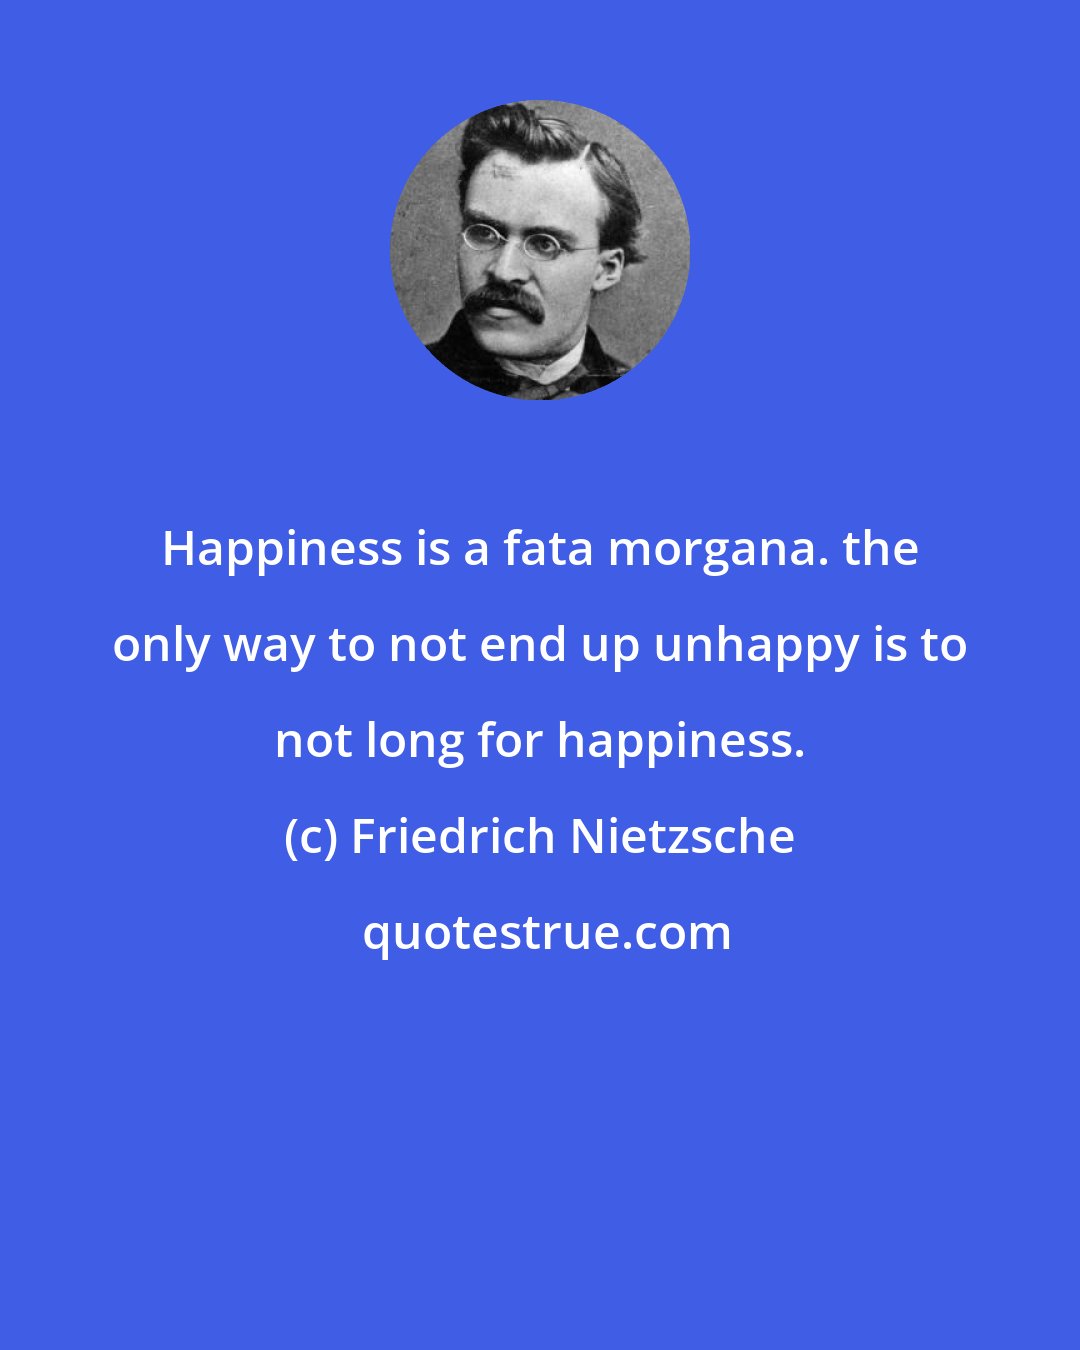 Friedrich Nietzsche: Happiness is a fata morgana. the only way to not end up unhappy is to not long for happiness.